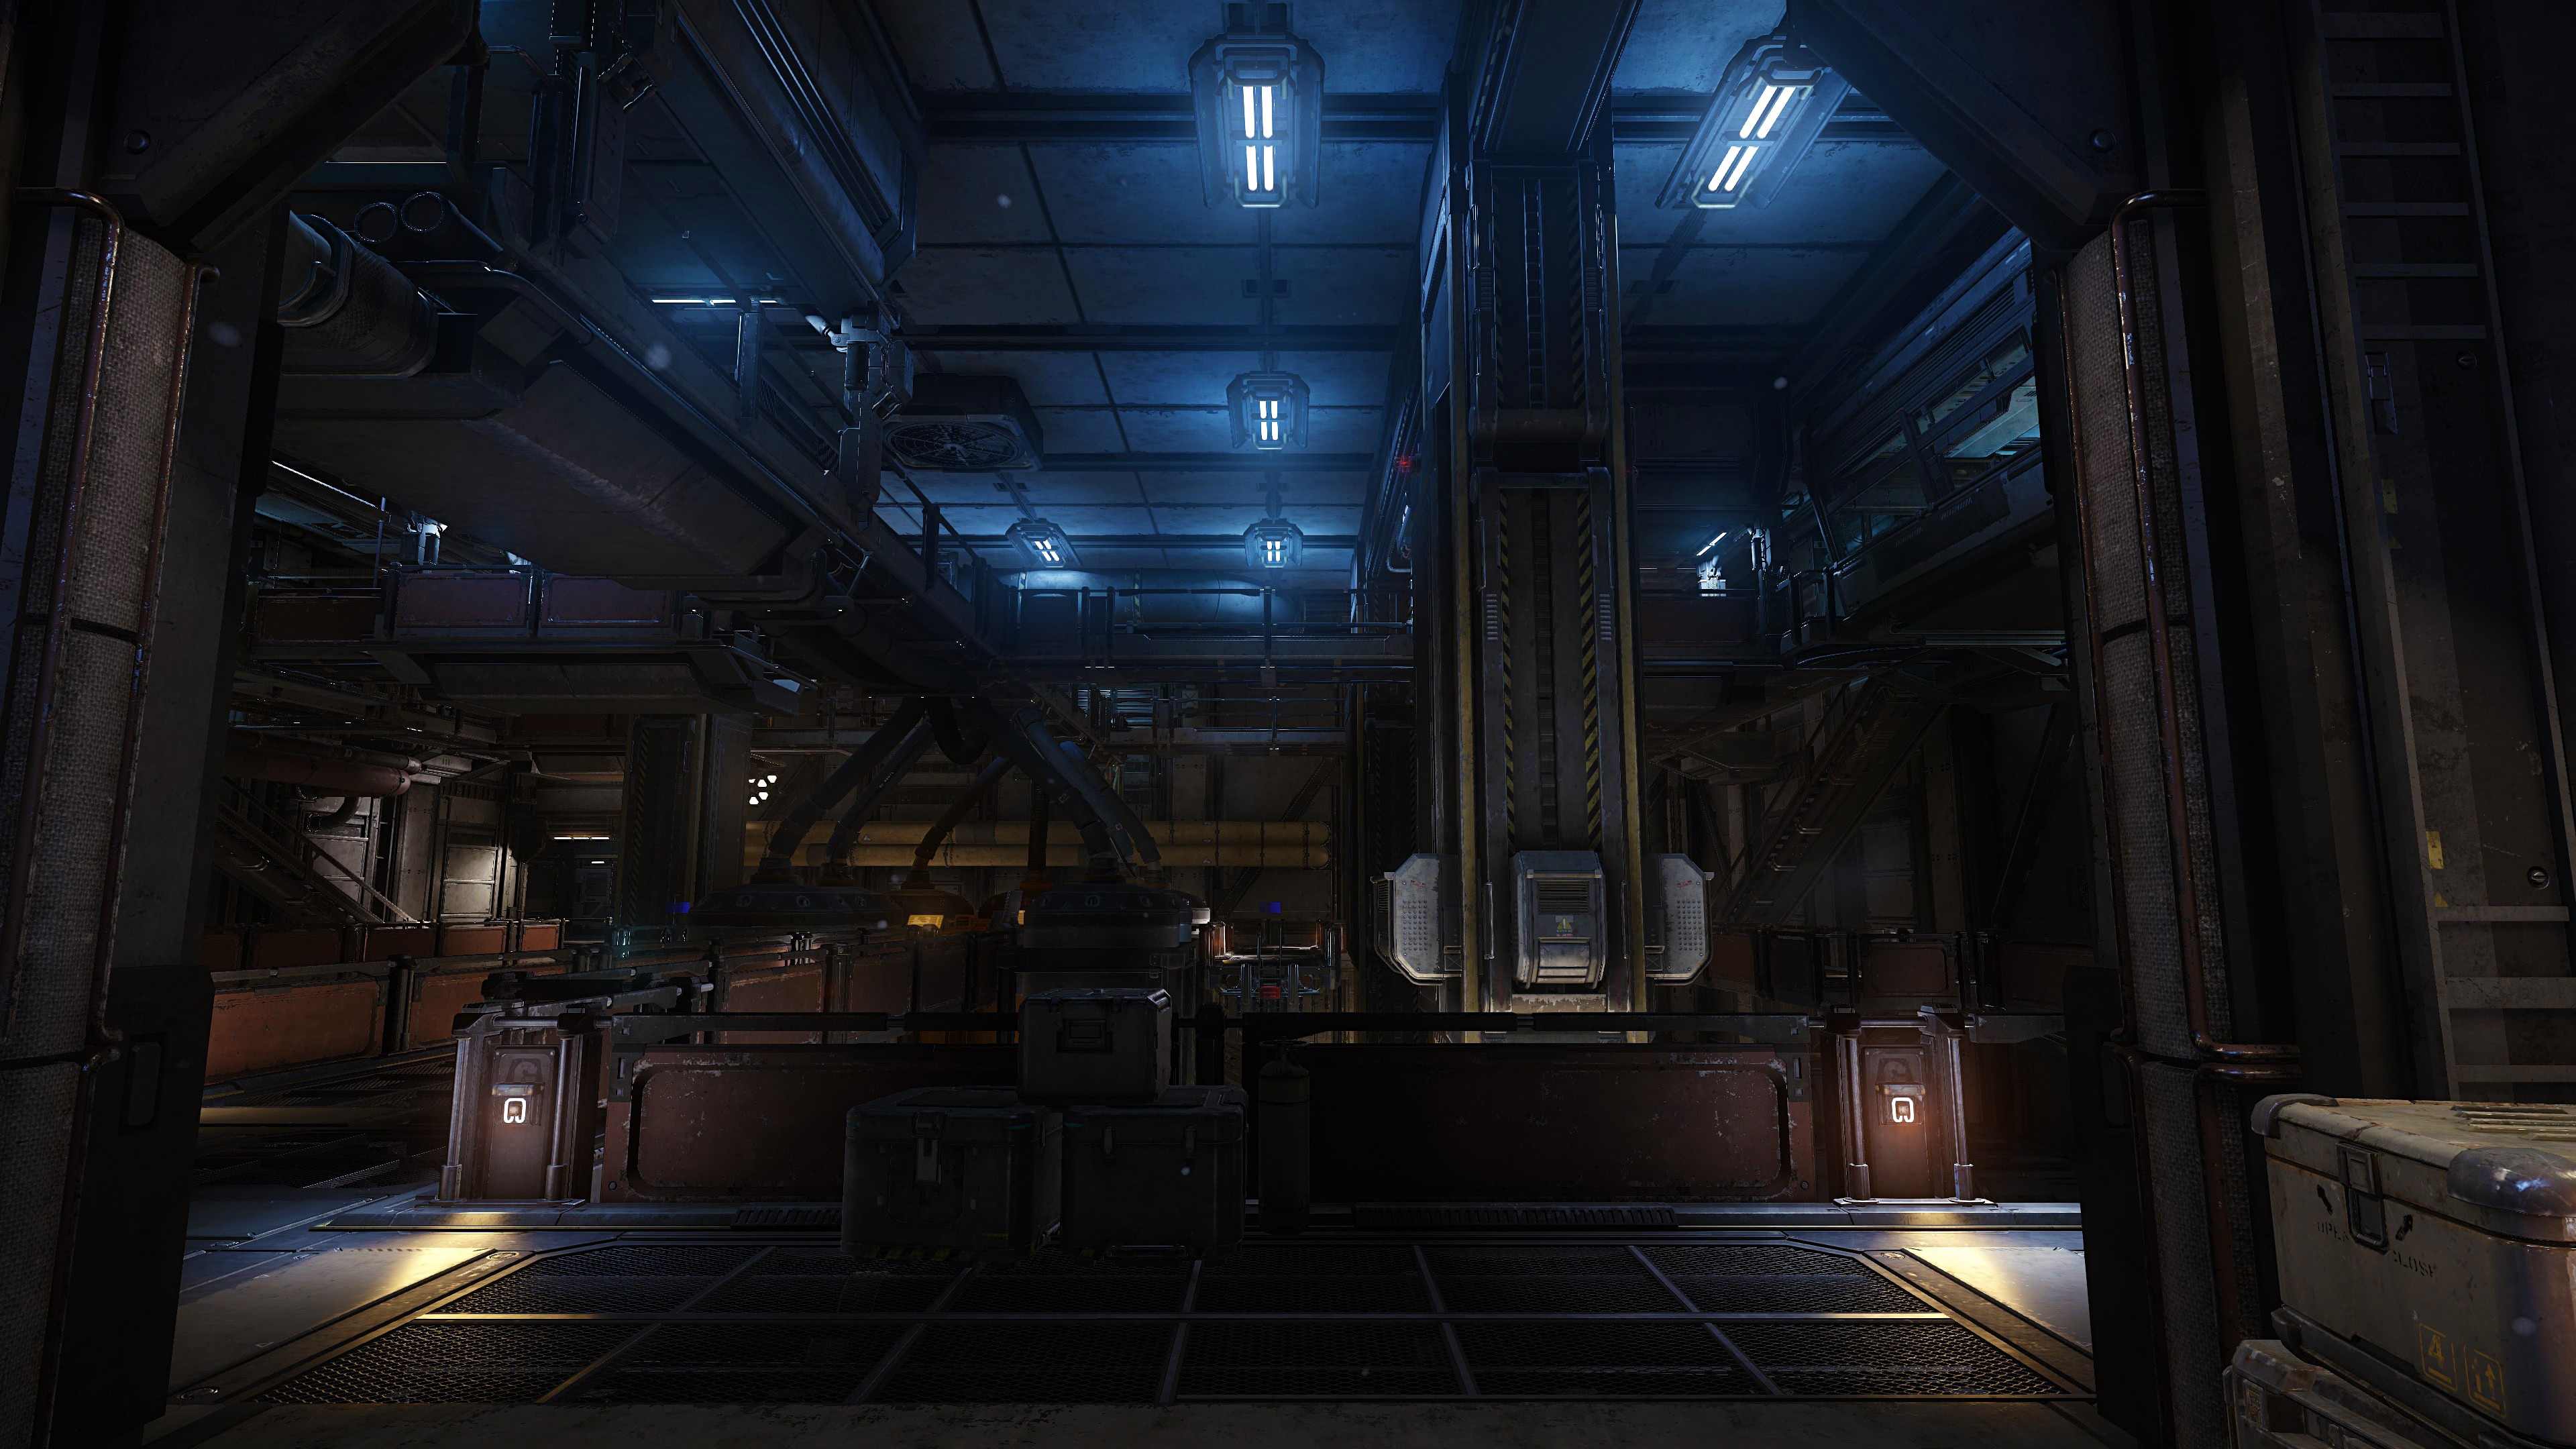 Star Citizen First Person Shooter Futuristic Science Fiction Video Games Screen Shot CryEngine 3840x2160